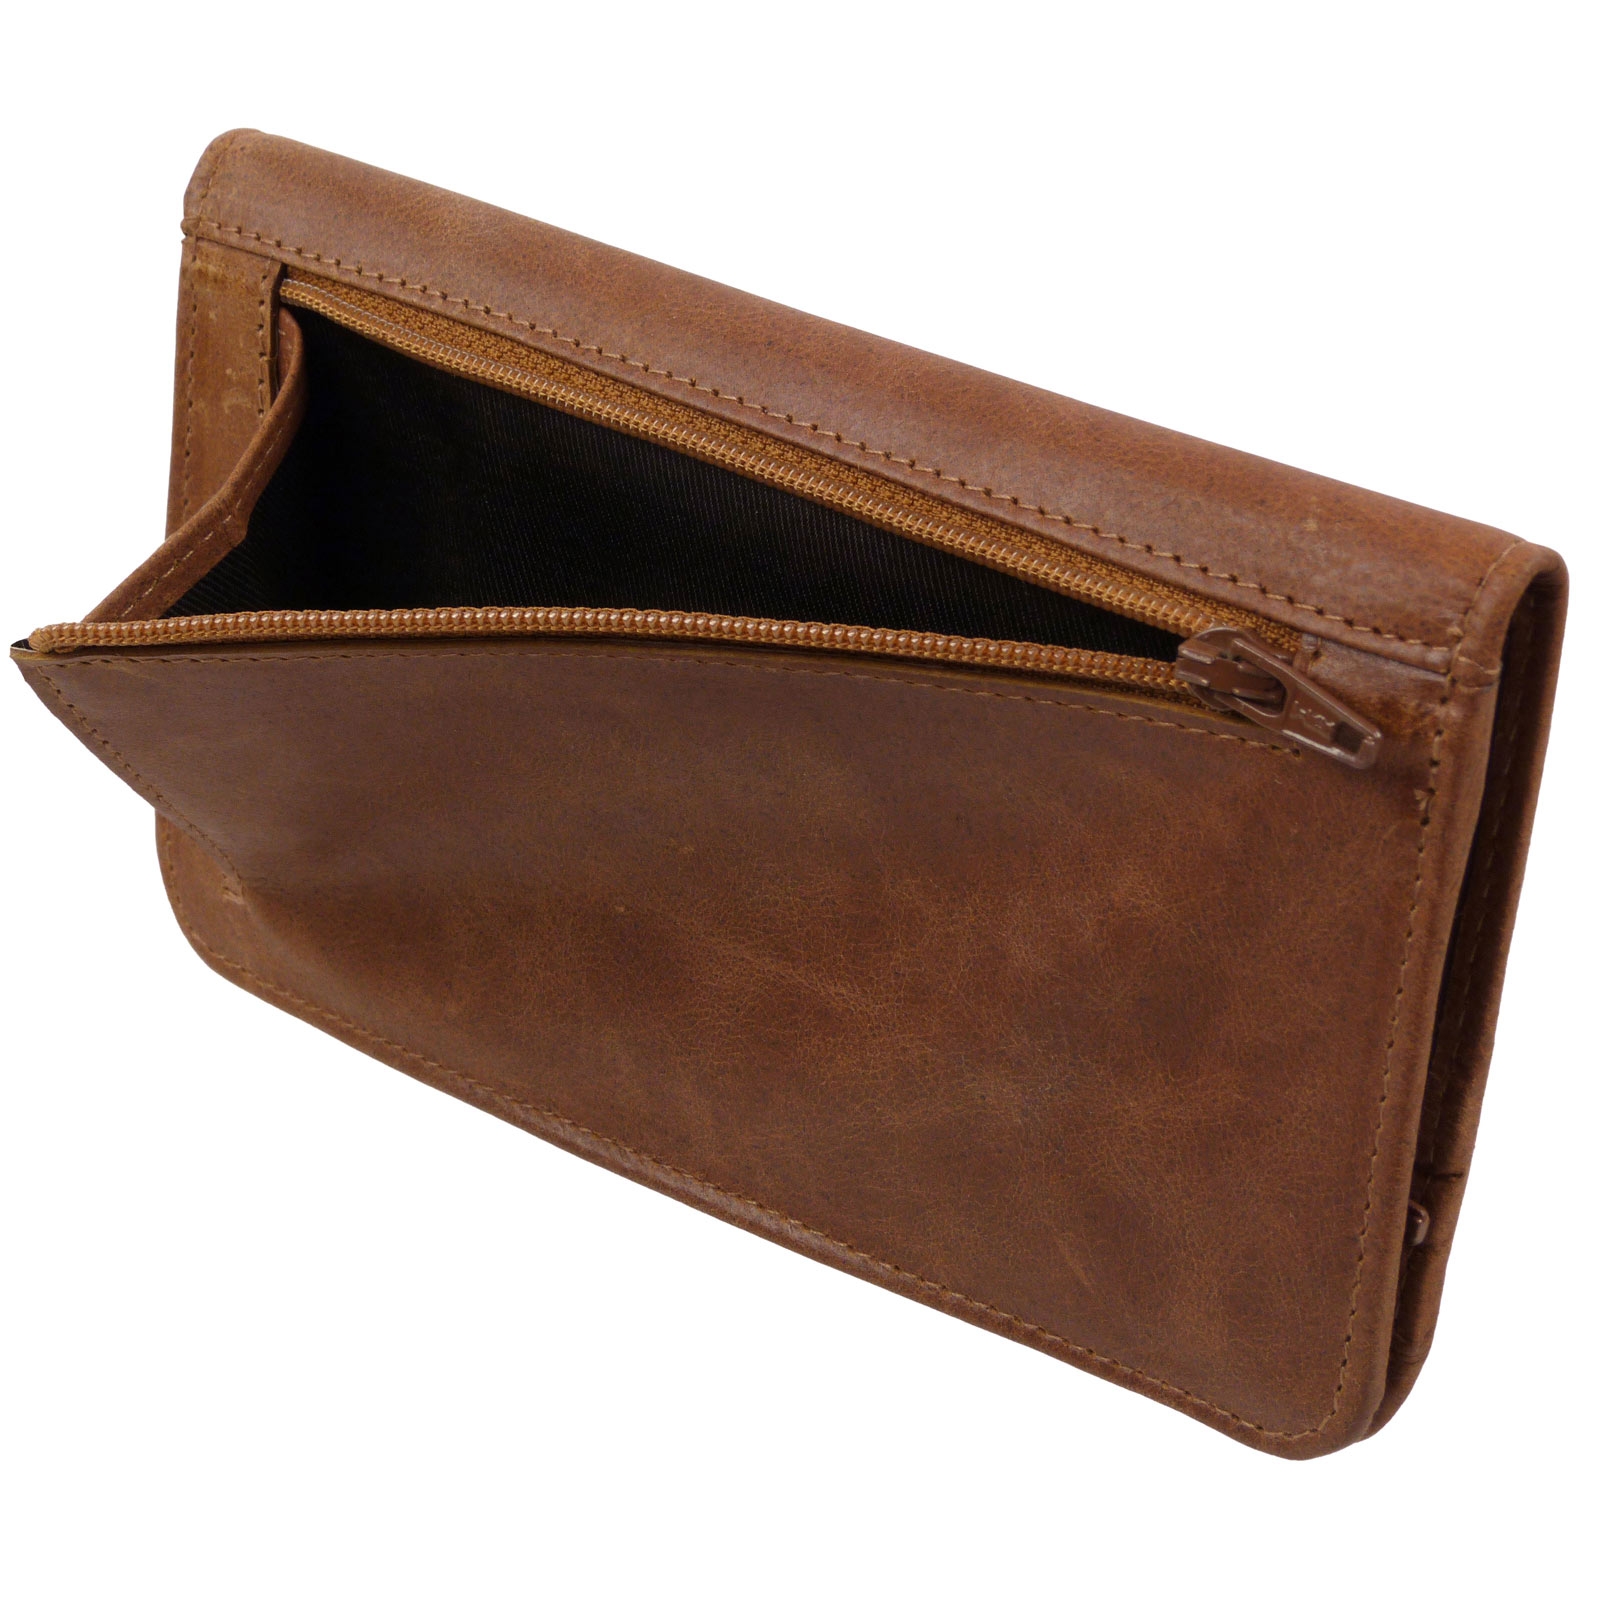 Download Oakridge Distressed Tan Leather Tobacco Pouch with Stud Fastener | eBay